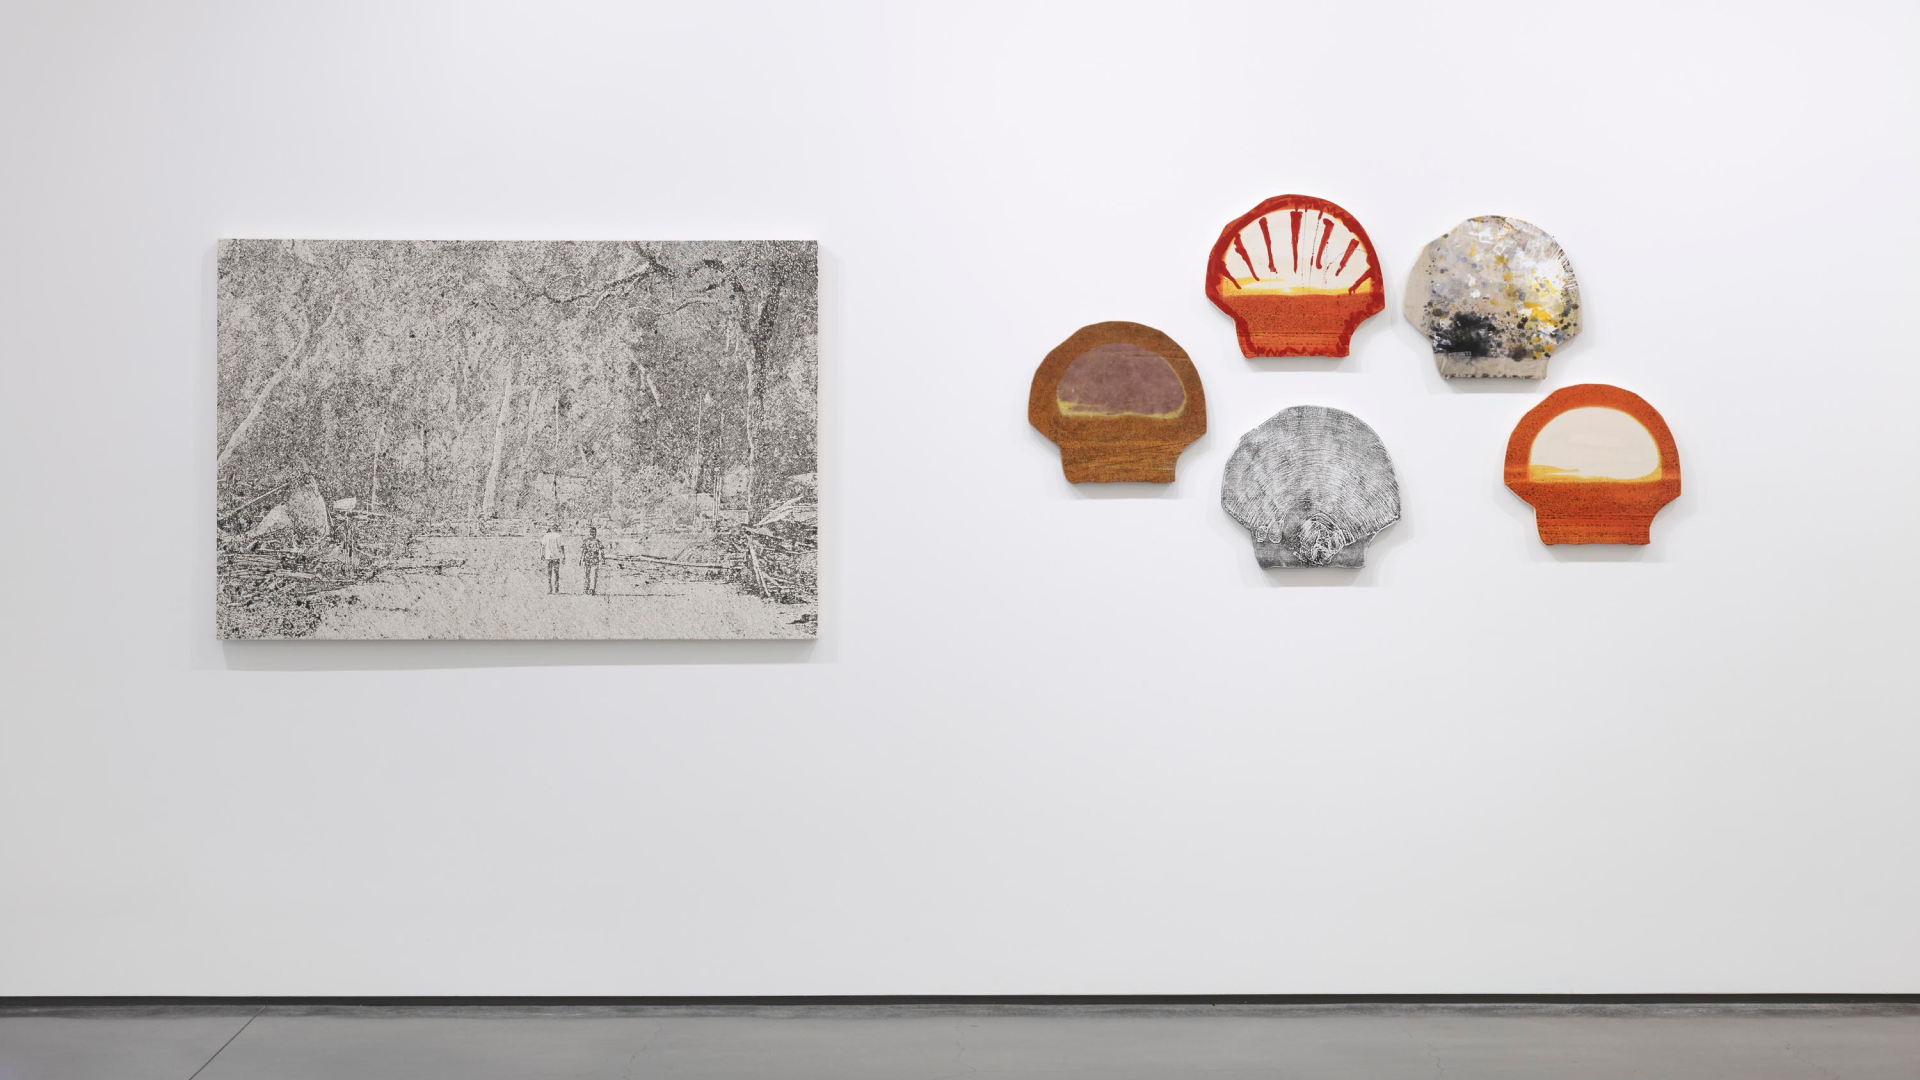 Installation view of the exhibition, Nate Lowman: Before and After, at Aspen Art Museum in Aspen, dated 2017.